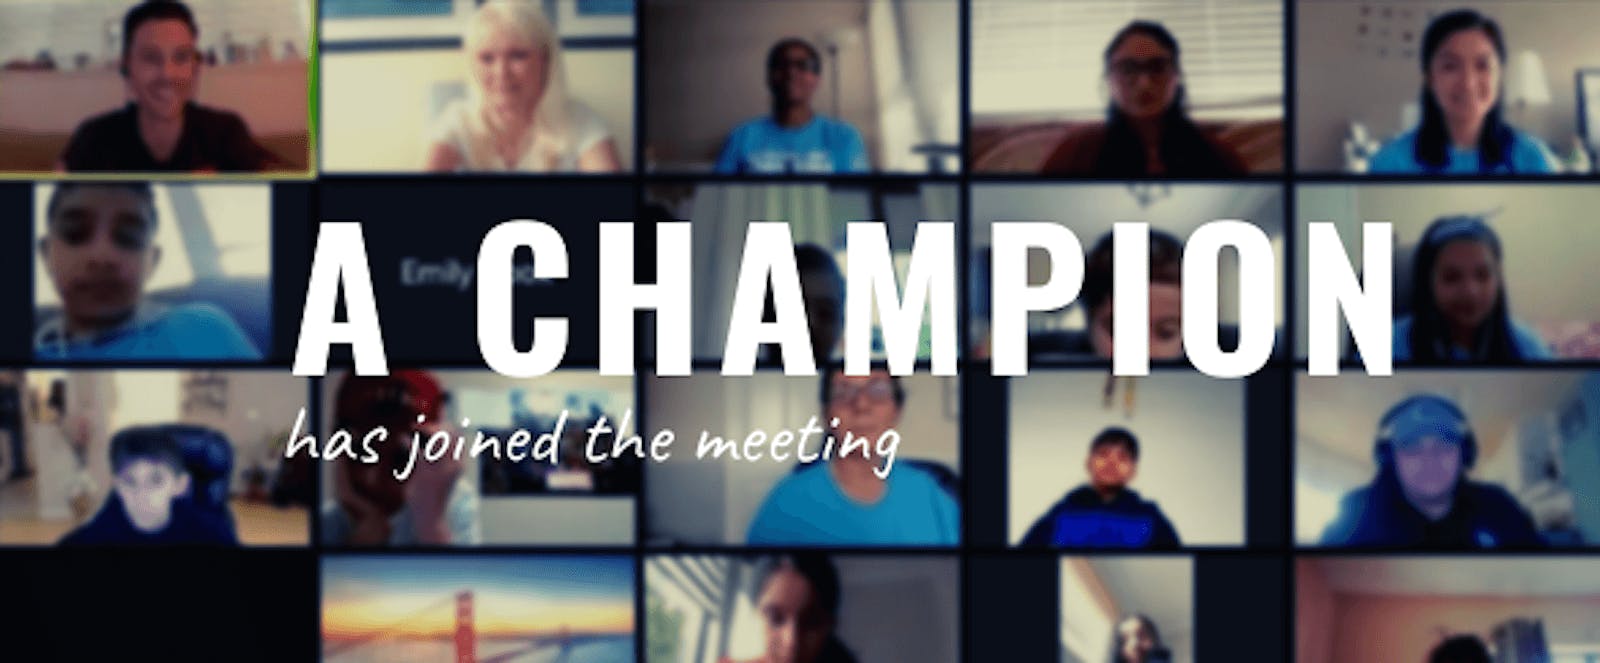 'A Champion has joined the meeting' text overlaying a blurry zoom meeting